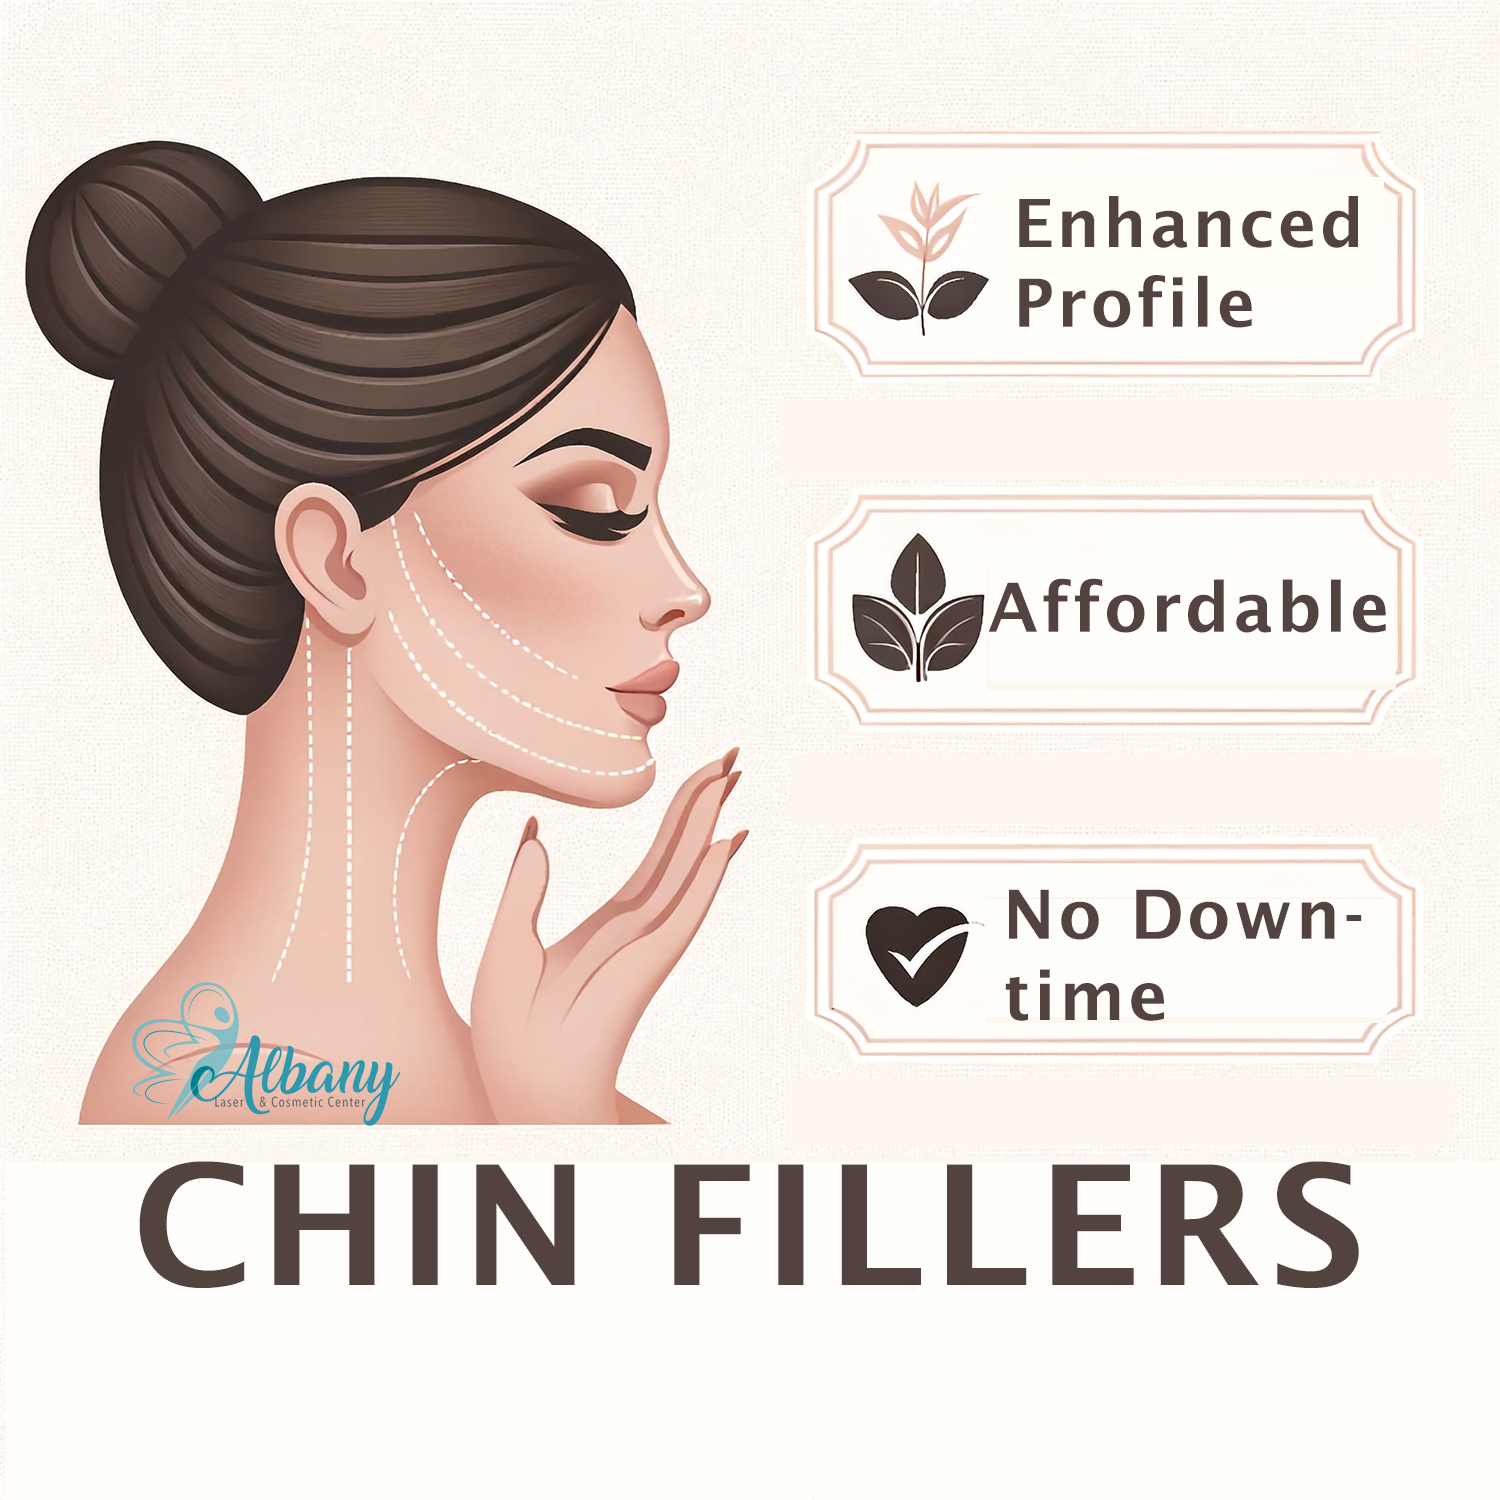 Chin fillers benefits infographic